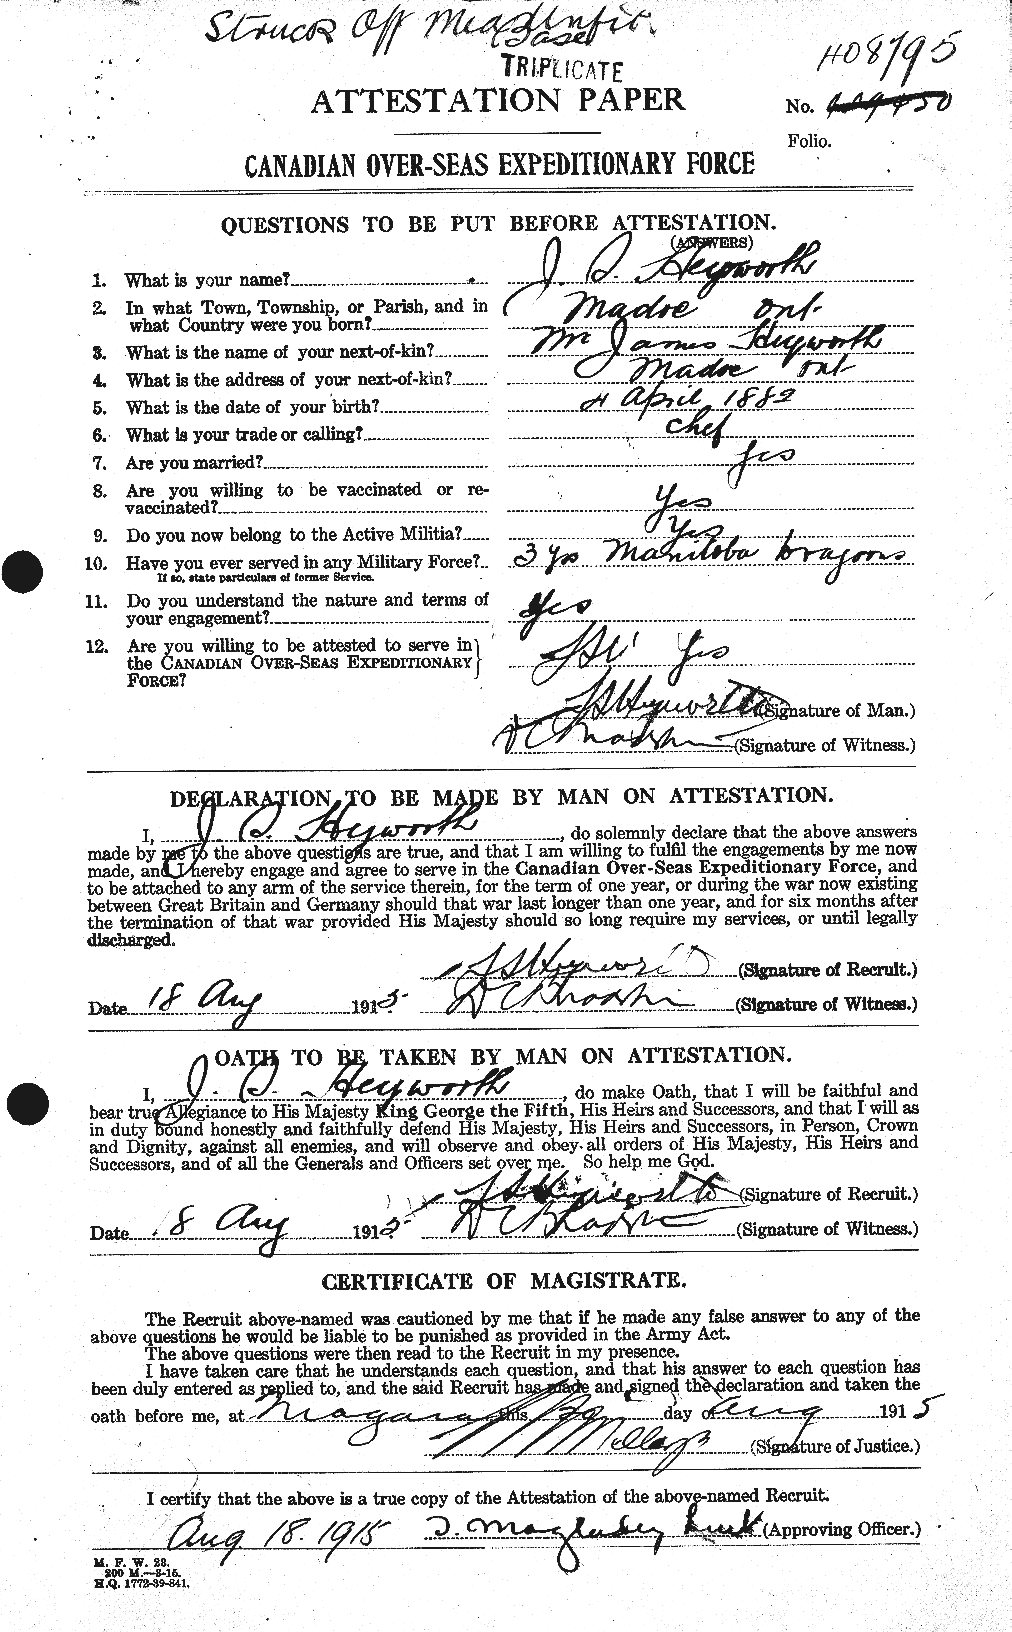 Personnel Records of the First World War - CEF 396137a